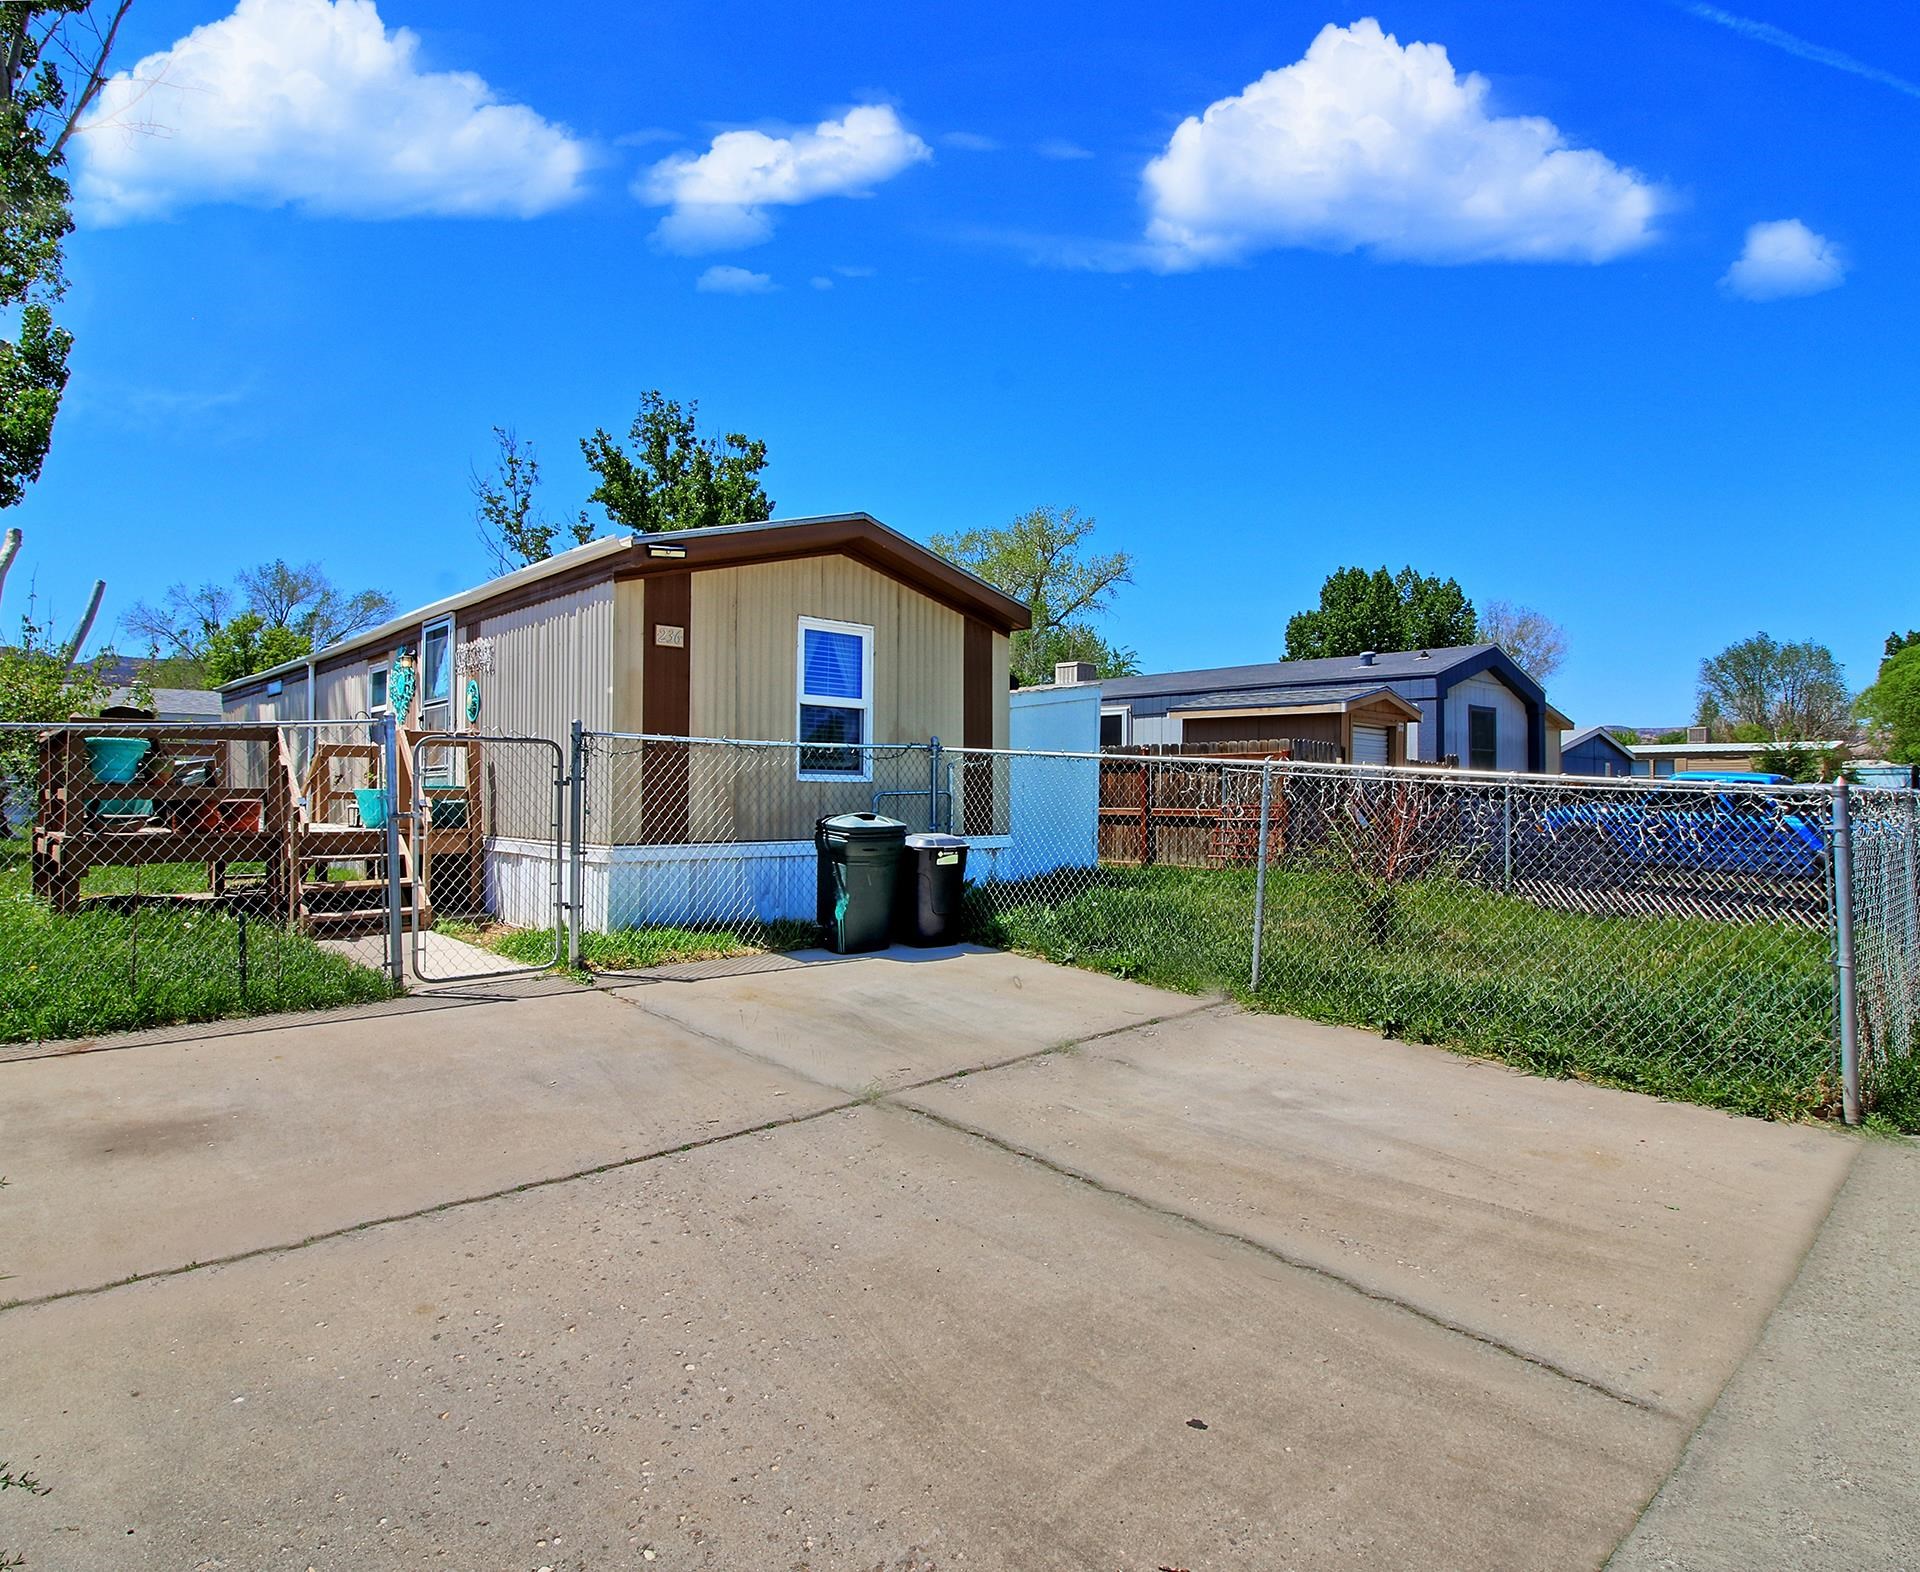 Welcome to Fruita! You must see this cute, charming home before its gone. Open living space, lots of light and beautifully cared for. Nice front deck where you can enjoy the cool night air and sunny days.